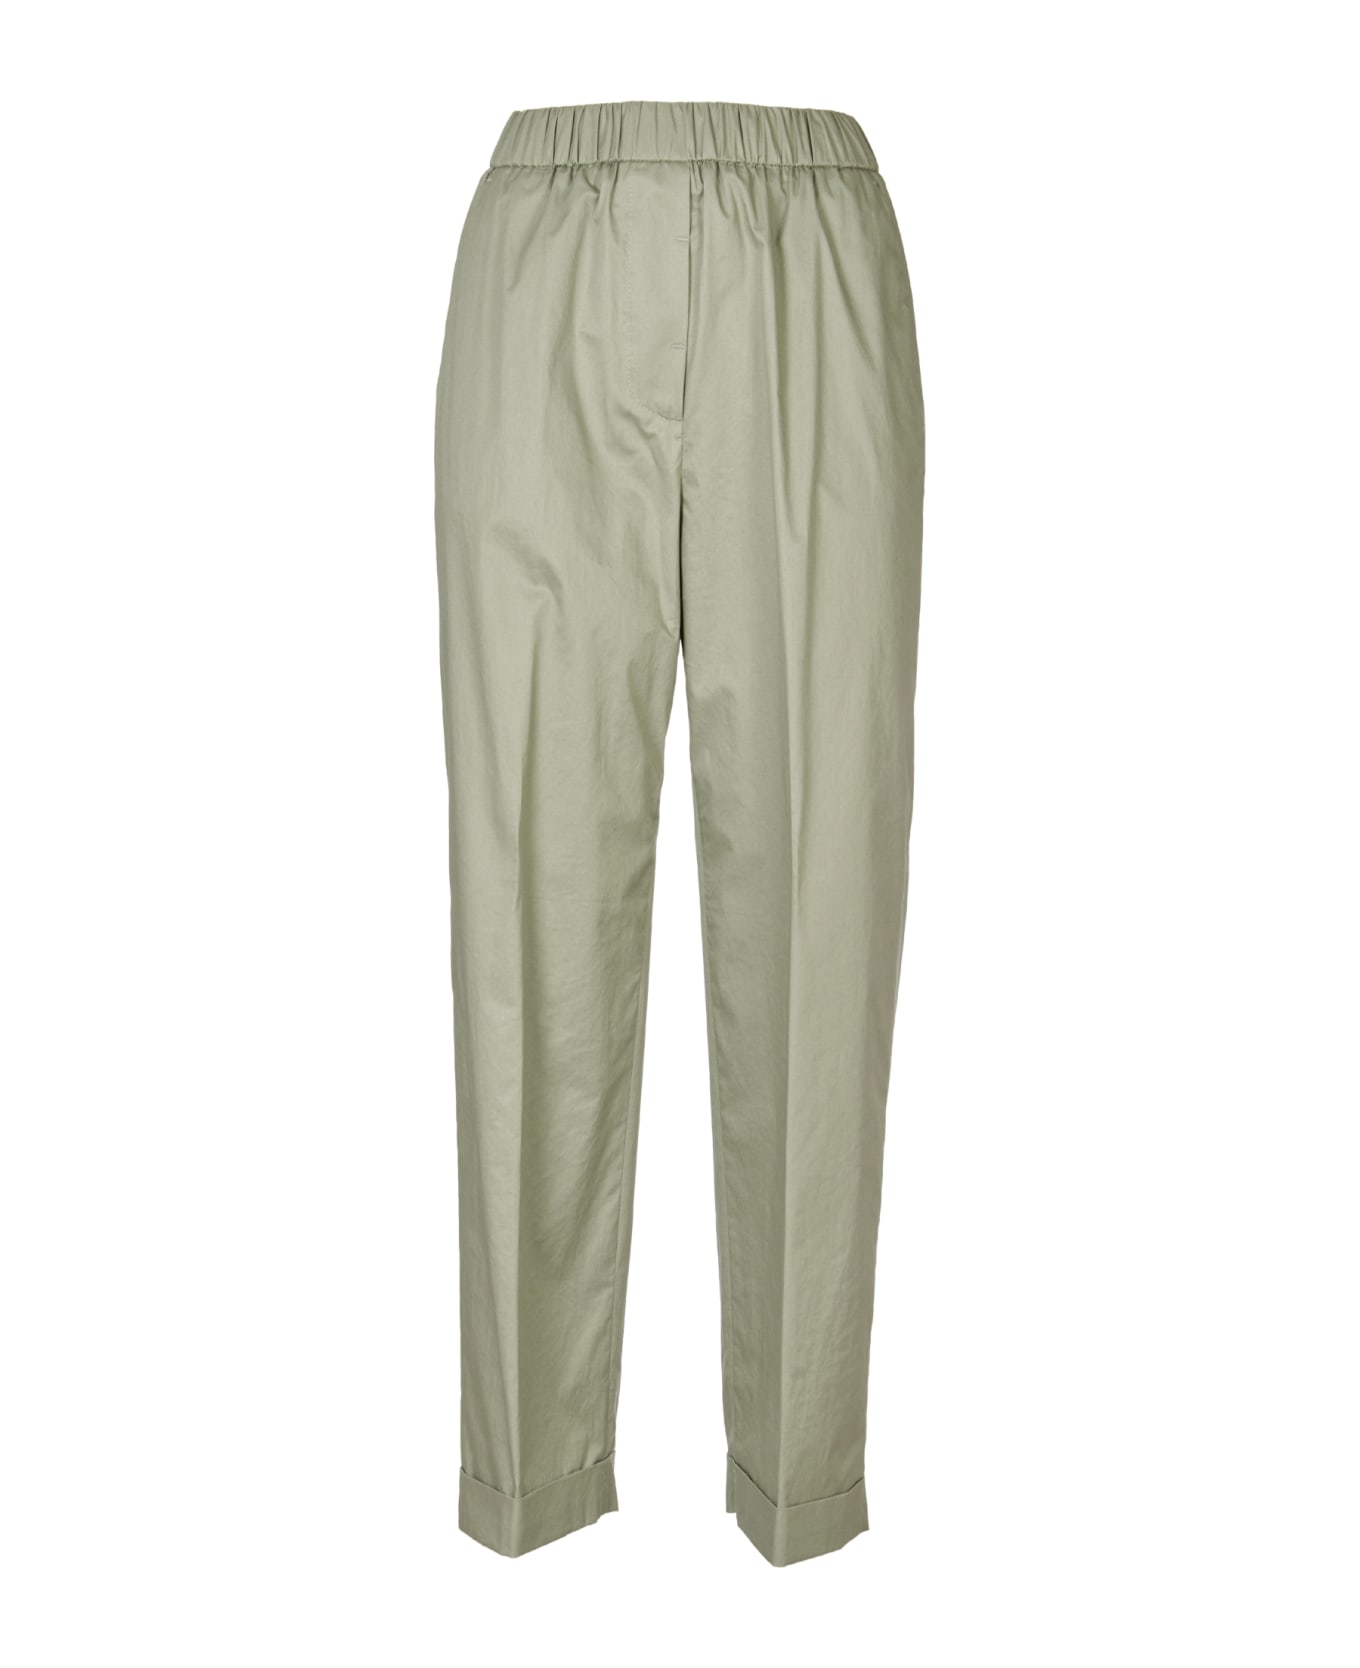 Peserico Trousers - Green